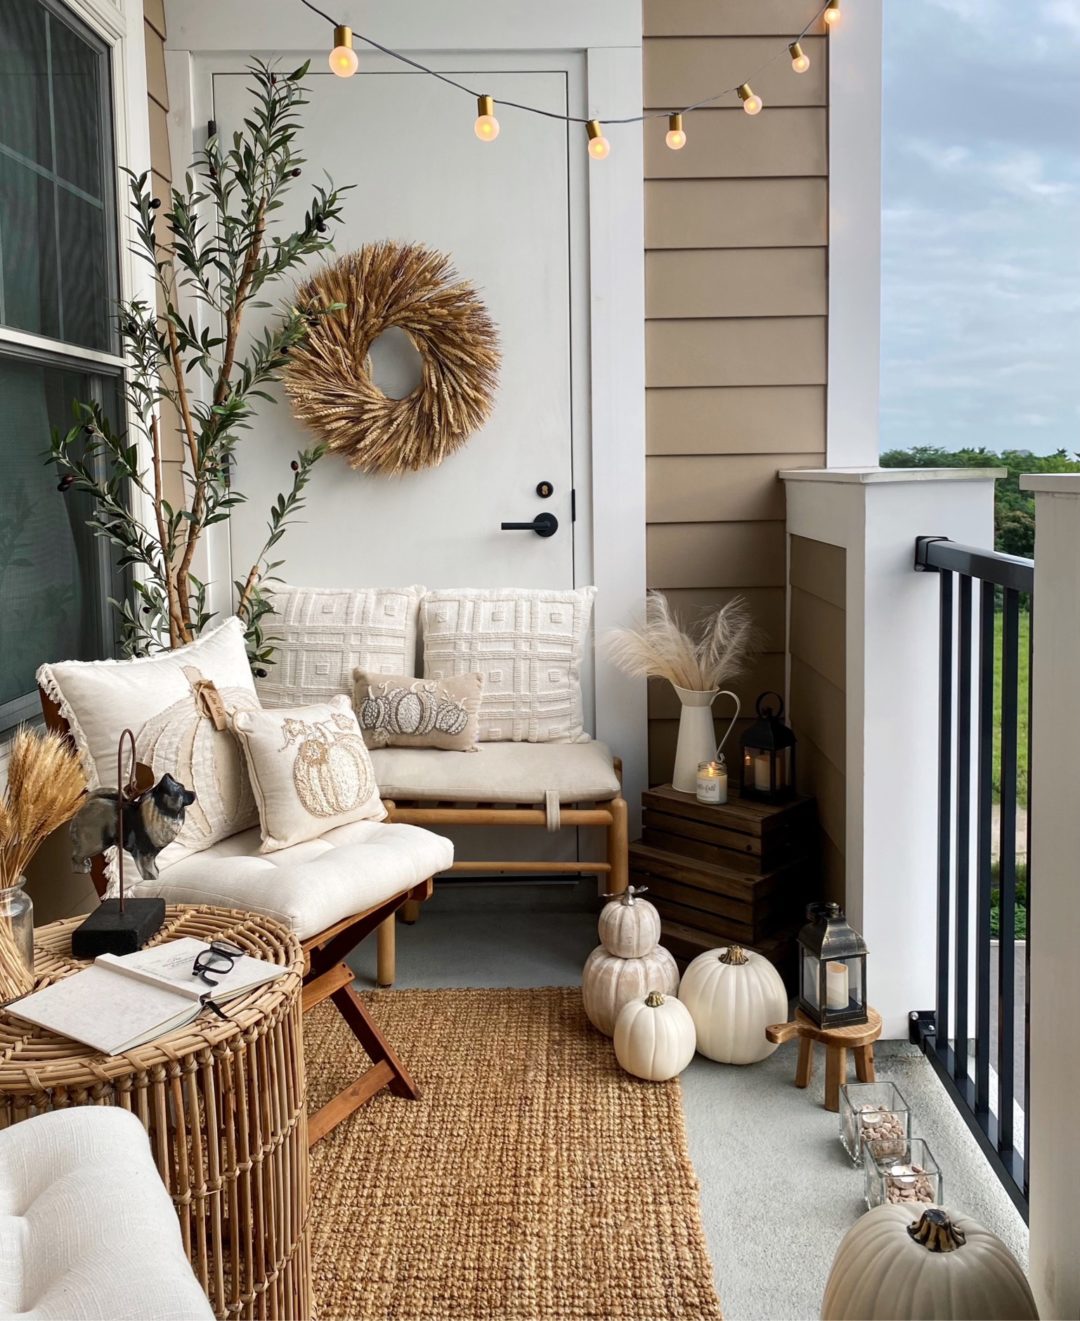 How To Decorate An Apartment Balcony For Fall - The House of Sequins